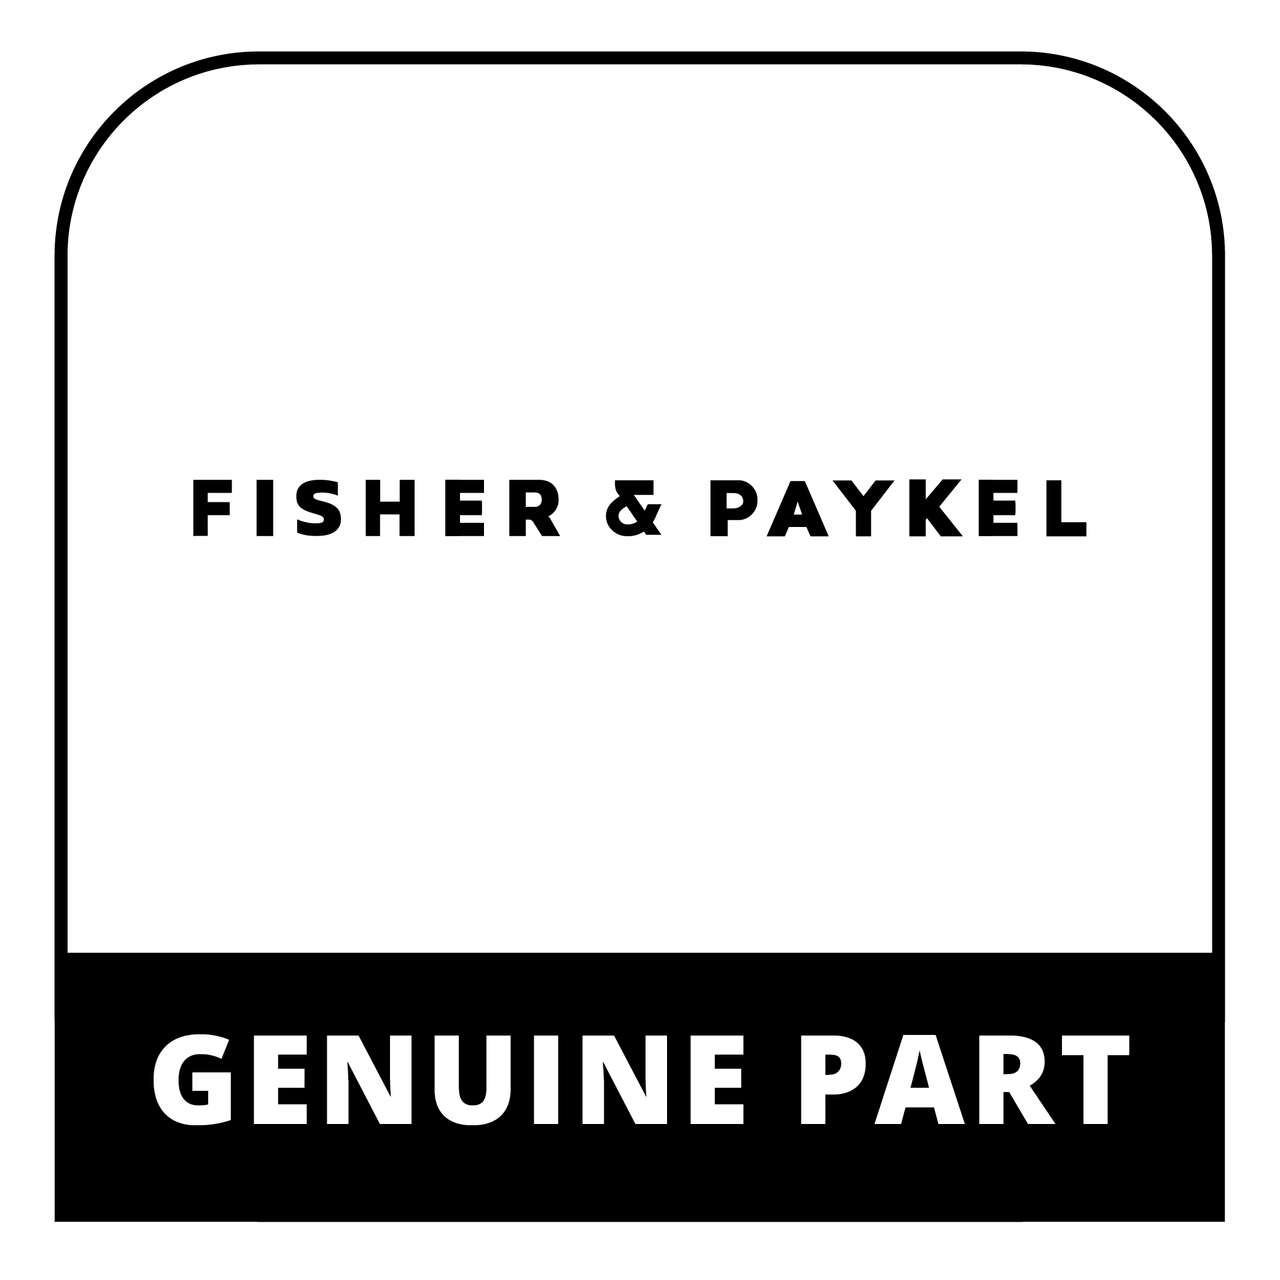 Fisher & Paykel 212770 - Front Frame R/H # 688590381 - Discontinued 9/19 MT - Genuine Fisher & Paykel (DCS) Part